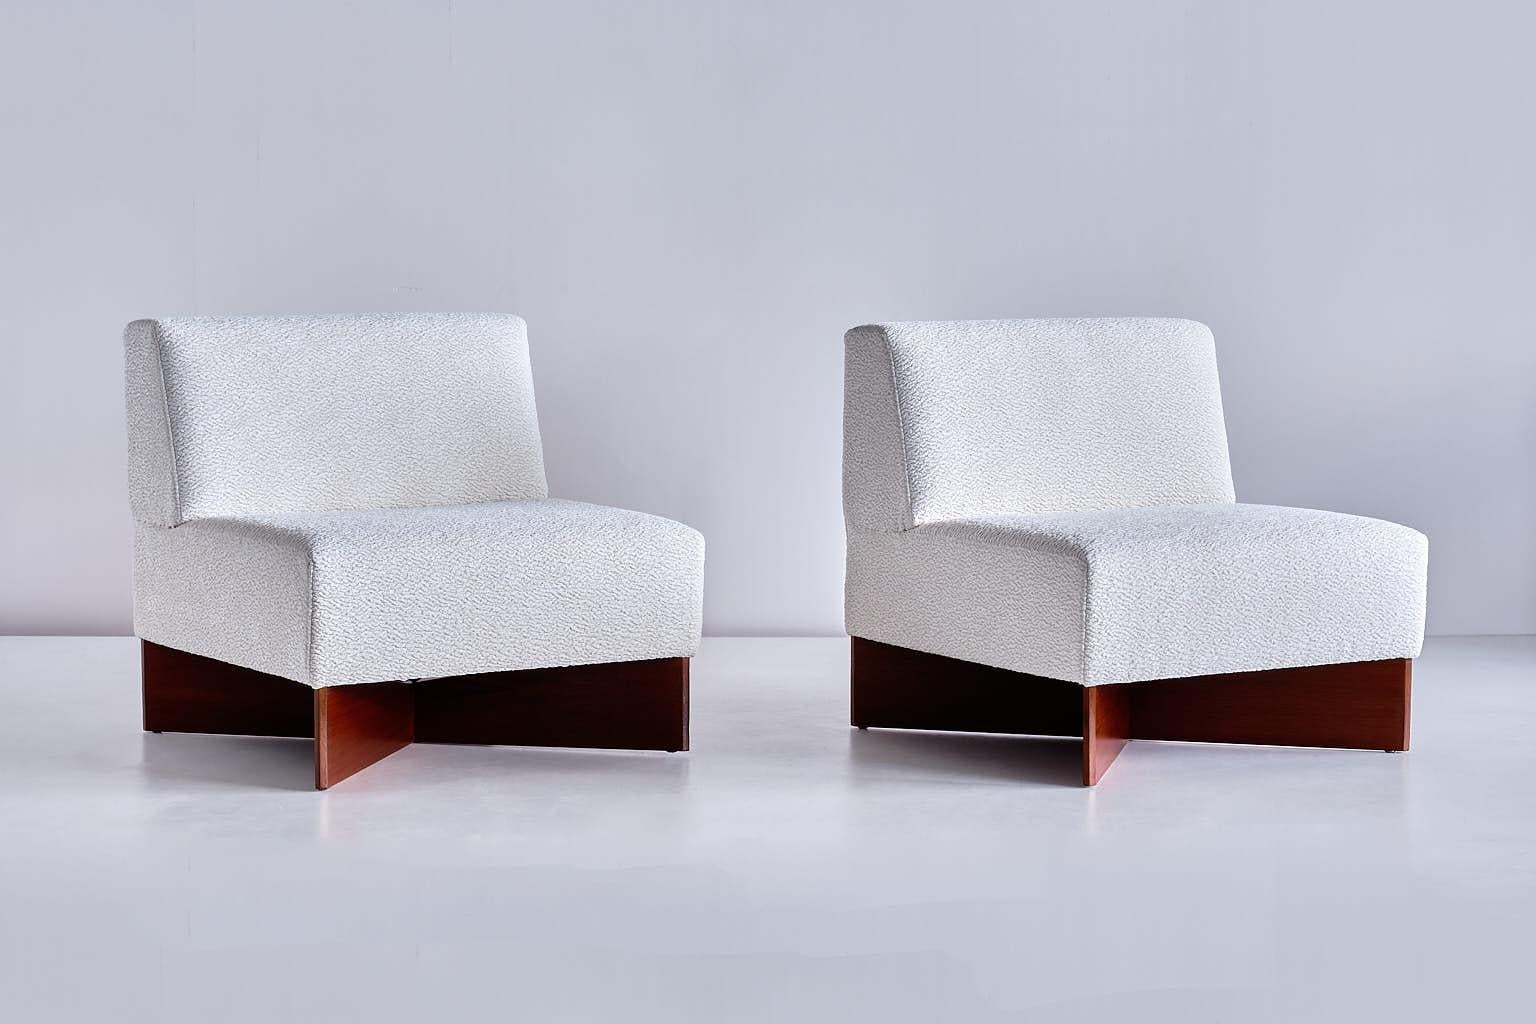 This lounge chair model known as CA-21 or Capitole was designed by Pierre Guariche and produced by Les Huchers-Minvielle in the early 1960s. The striking X-shaped teak legs and geometric forms give the chairs a modern, architectural feel.

The